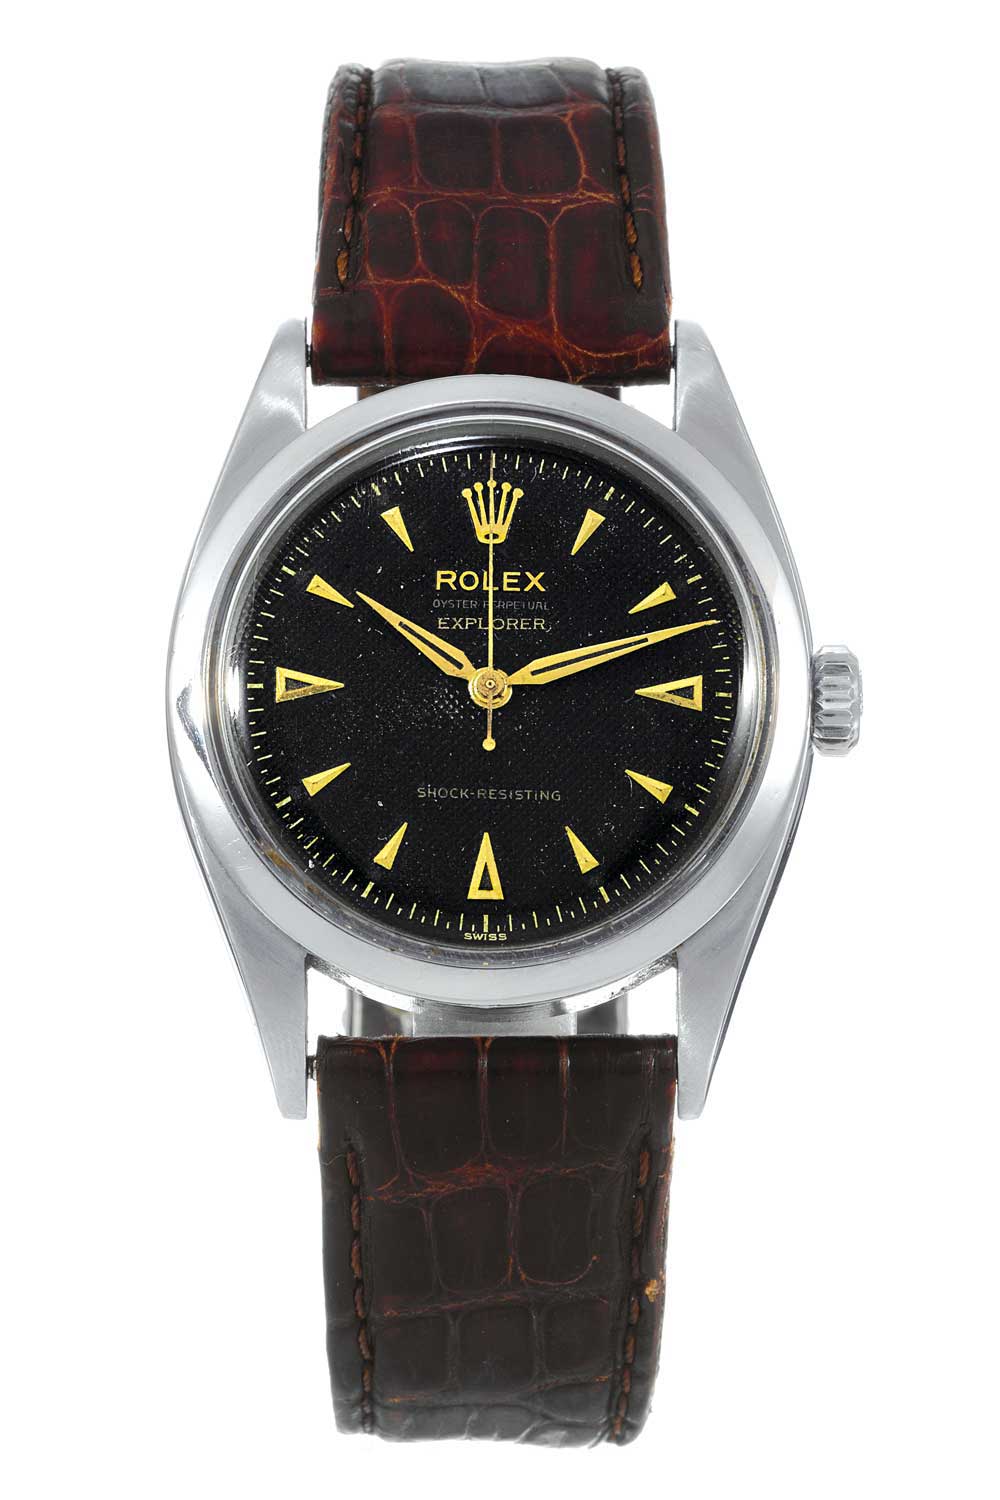 Rolex Explorer ref. 6298 with black dial. Both 6298 and 6098 featured characteristically 1950s Rolex Oyster dials with closed minute track, applied arrow hour markers and applied Rolex coronet.